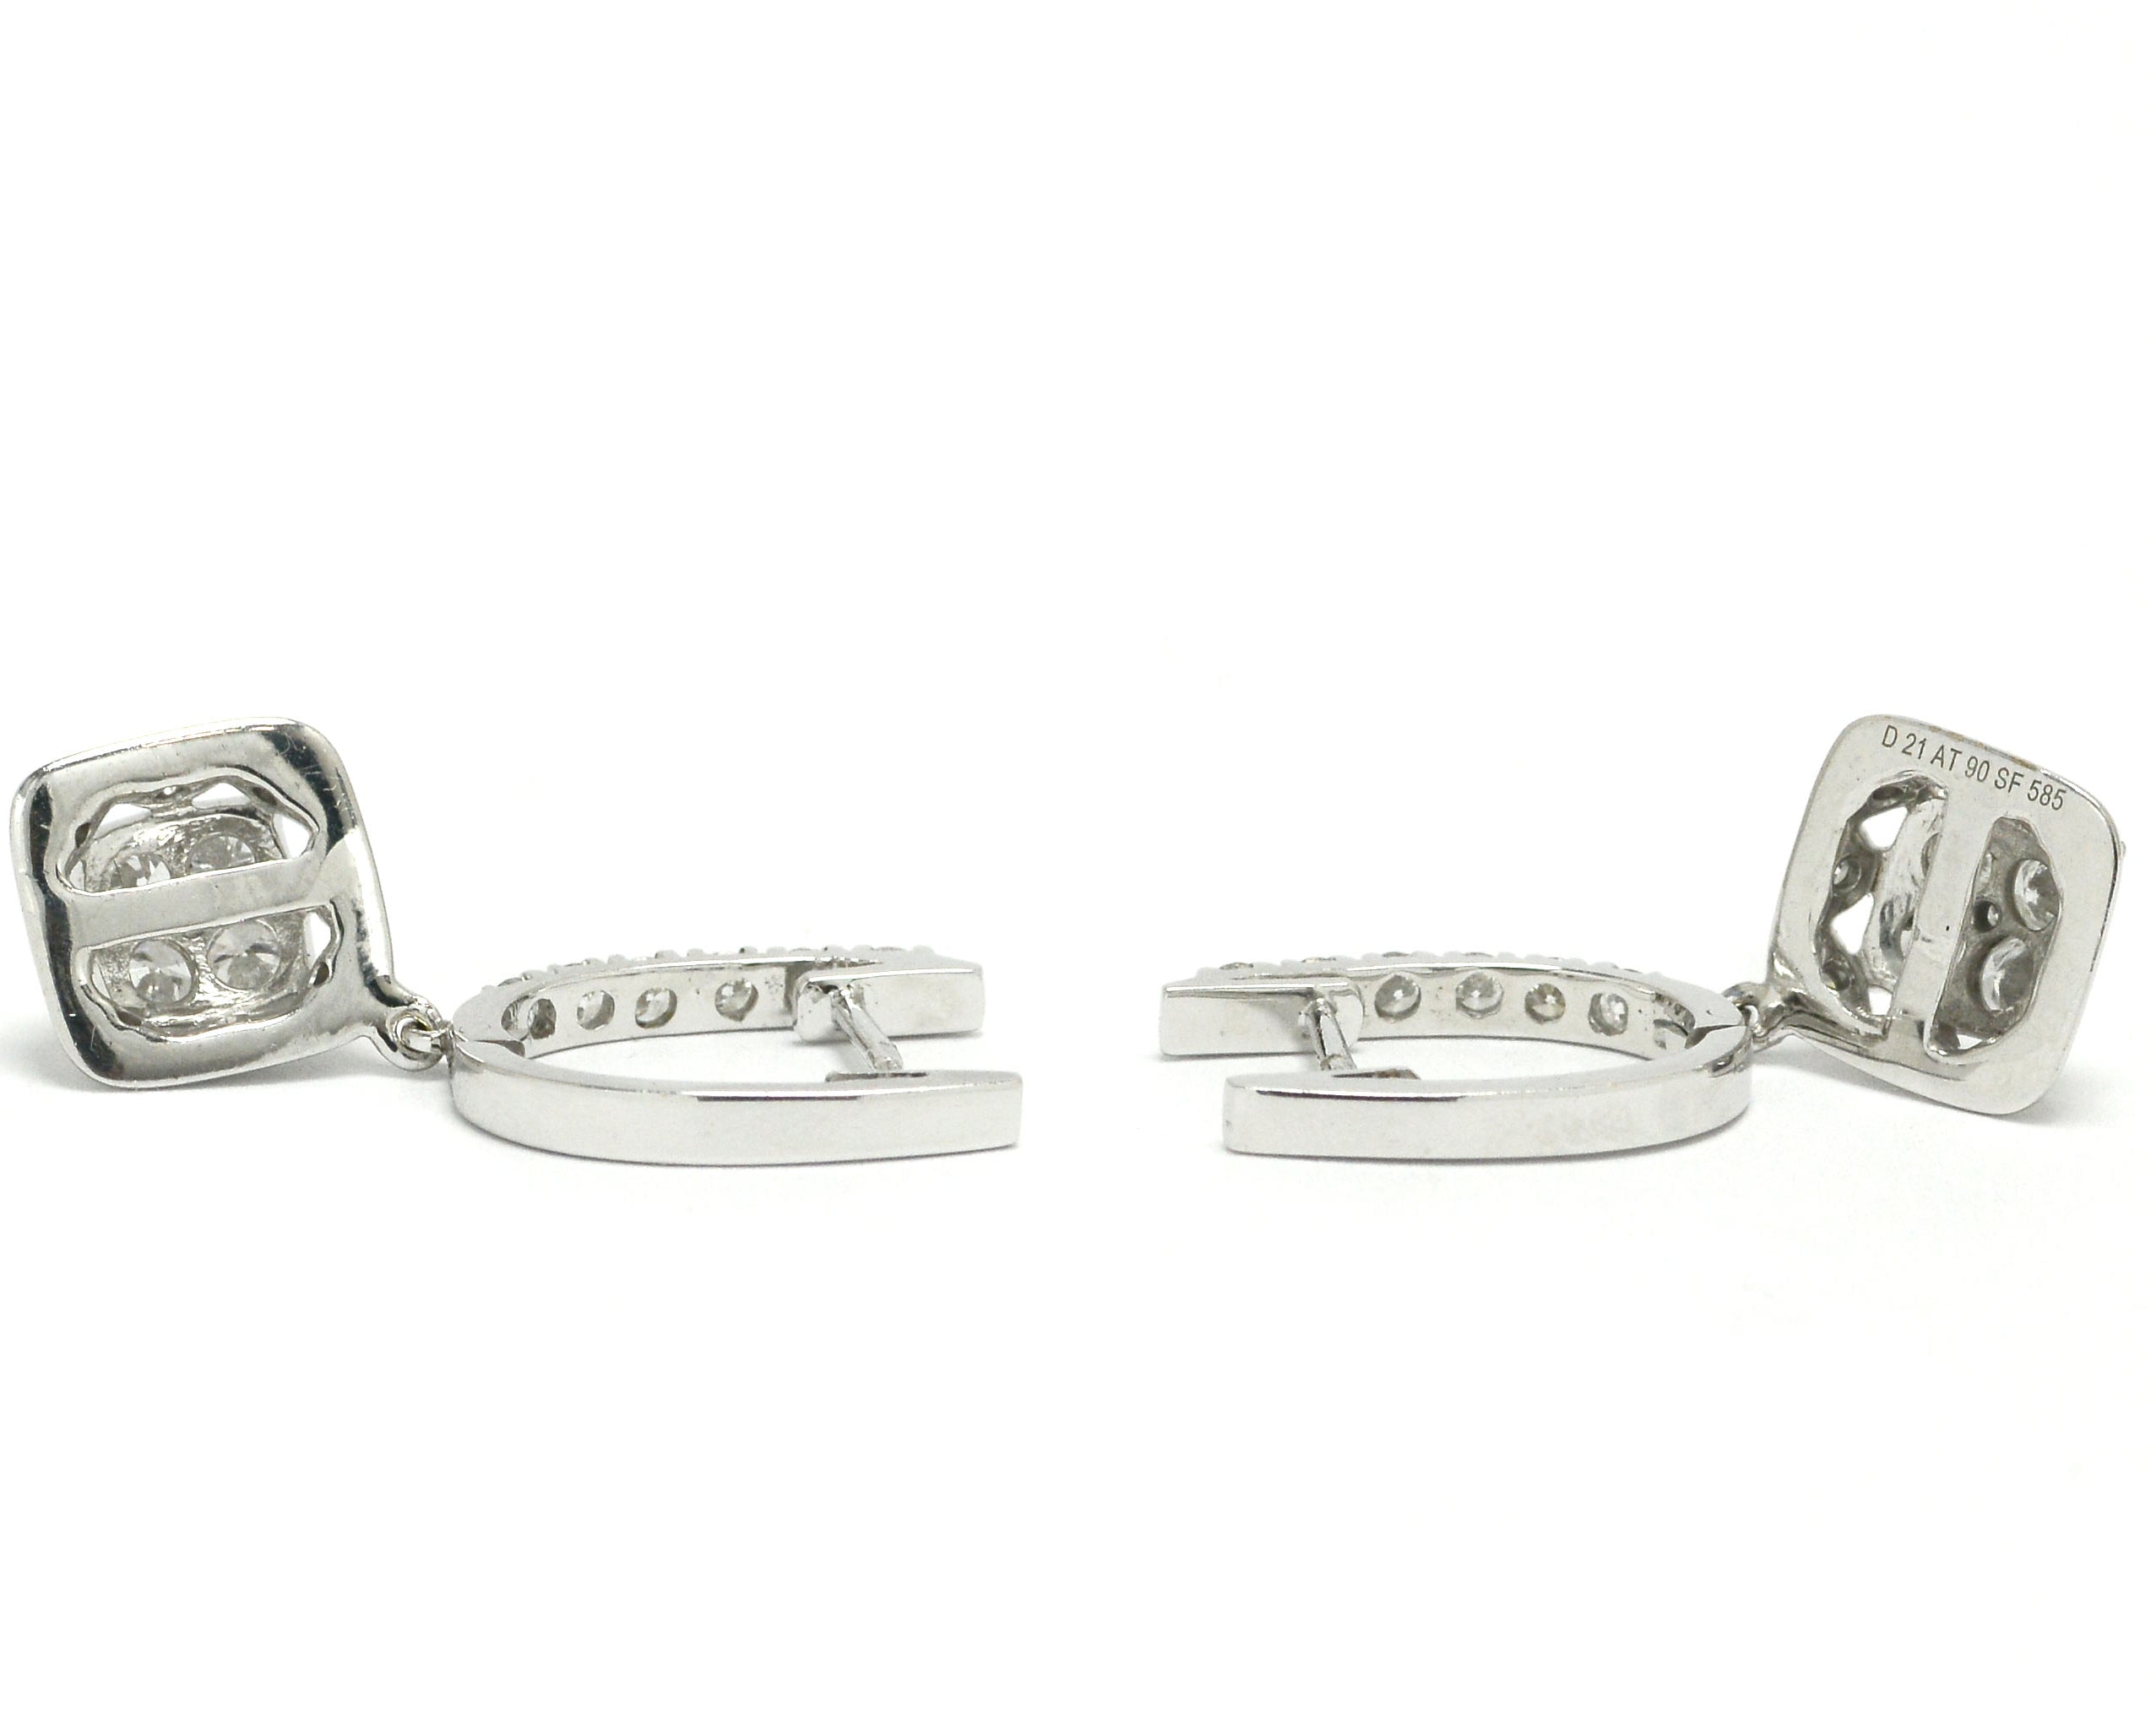 White gold horseshoe latch earrings lined with diamonds.